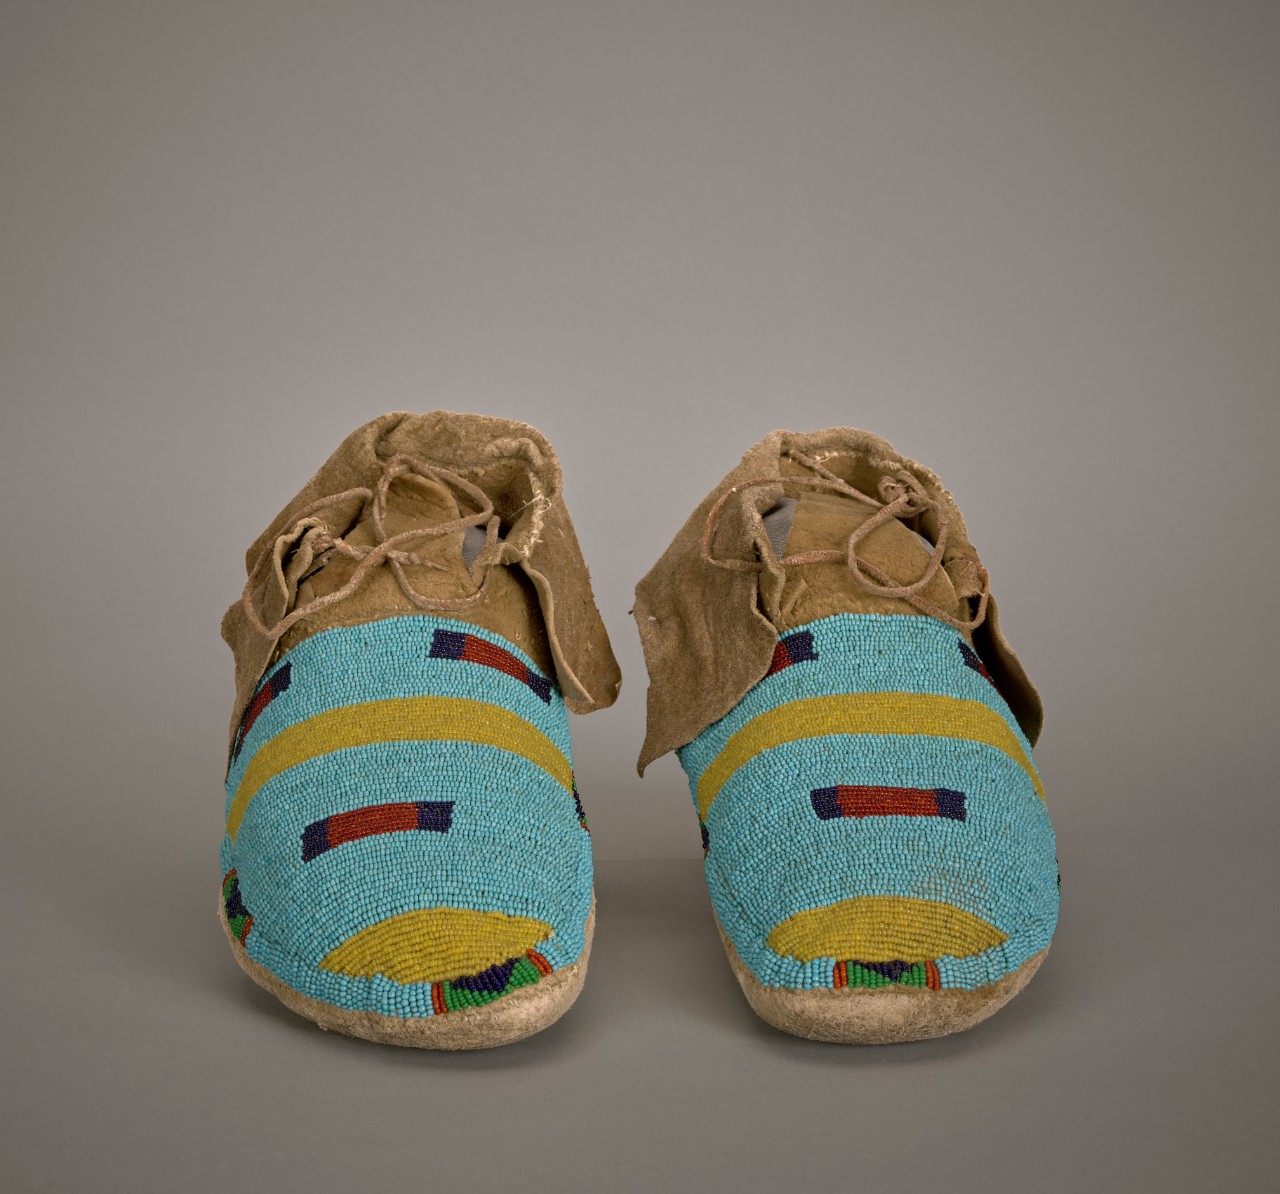 Unidentified Crow (Apsáalooke) artist, Wedding Moccasins, early 20th century, rawhide with beads